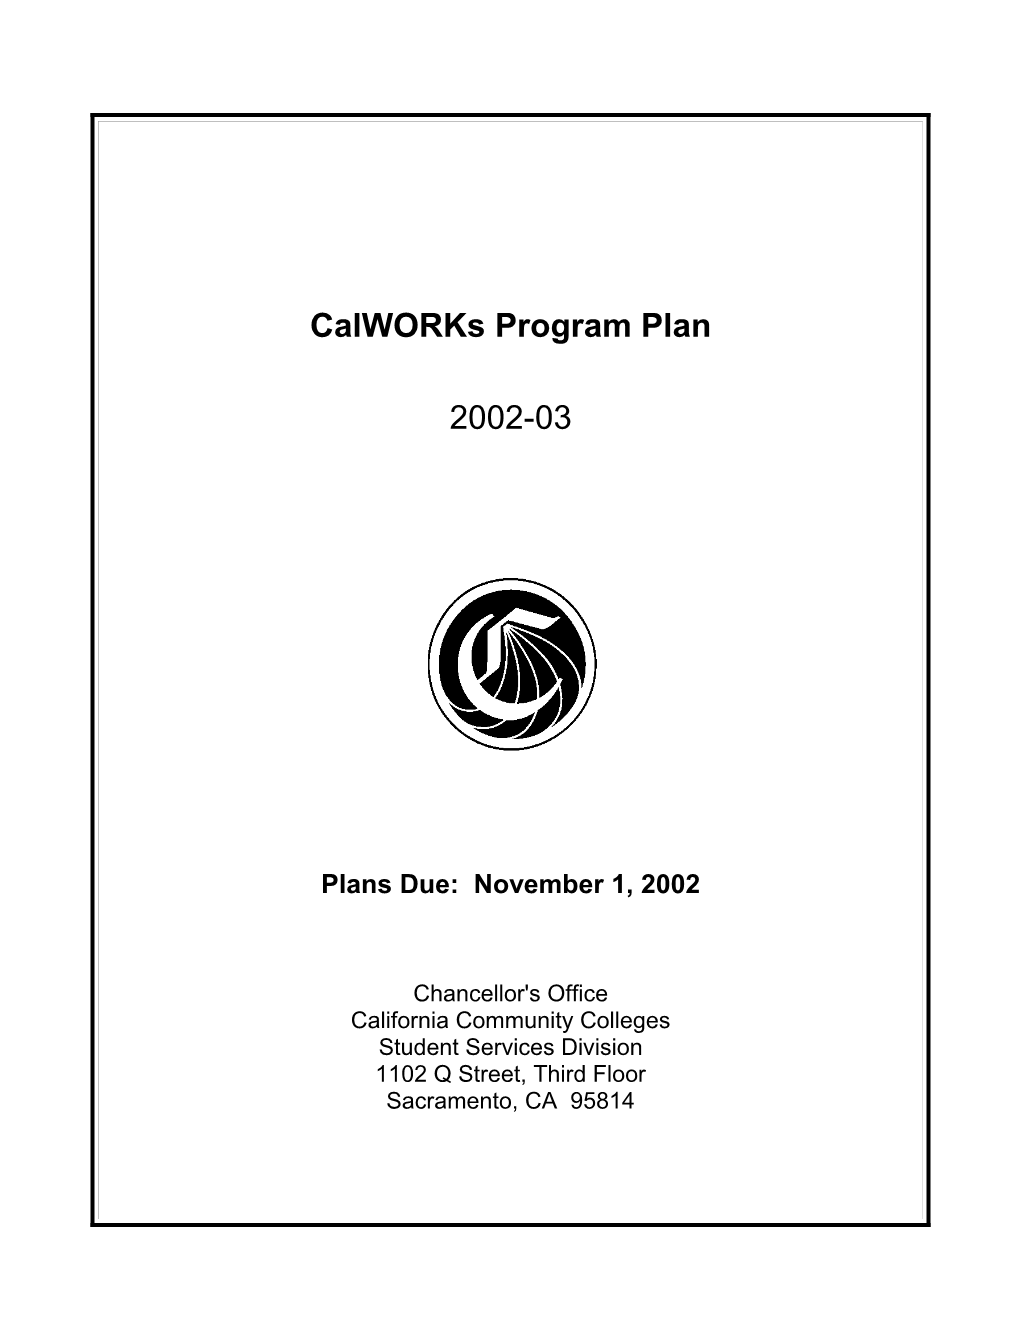 2001-02 Renewal Application for Calworks and TANF Funding